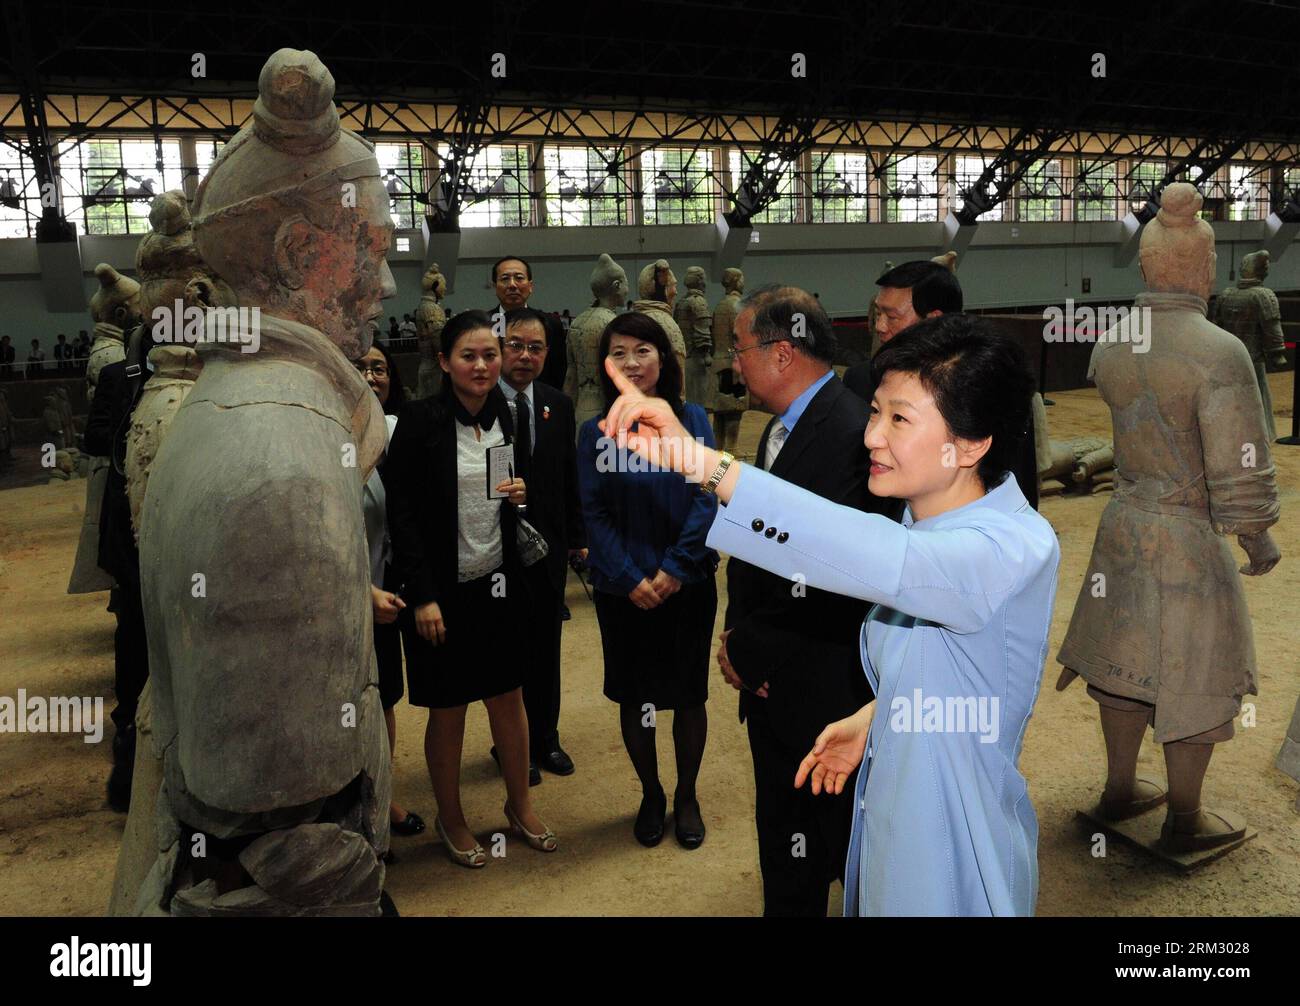 Bildnummer: 59920642  Datum: 30.06.2013  Copyright: imago/Xinhua (130630) -- XI AN, June 30, 2013 (Xinhua) -- Republic of Korea (ROK) President Park Geun-hye visits the ancient terracotta army, buried for centuries to guard the tomb of China s first emperor Qinshihuang of the Qin Dynasty (221 BC-207 BC), in Xi an, capital city of northwest China s Shaanxi Province, on June 30, 2013. (Xinhua/Ding Haitao) (ry) CHINA-XI AN-ROK PRESIDENT-ARRIVE (CN) PUBLICATIONxNOTxINxCHN Politik people Südkorea Terrakotta Armee Soldat xas x0x 2013 quer premiumd      59920642 Date 30 06 2013 Copyright Imago XINHUA Stock Photo